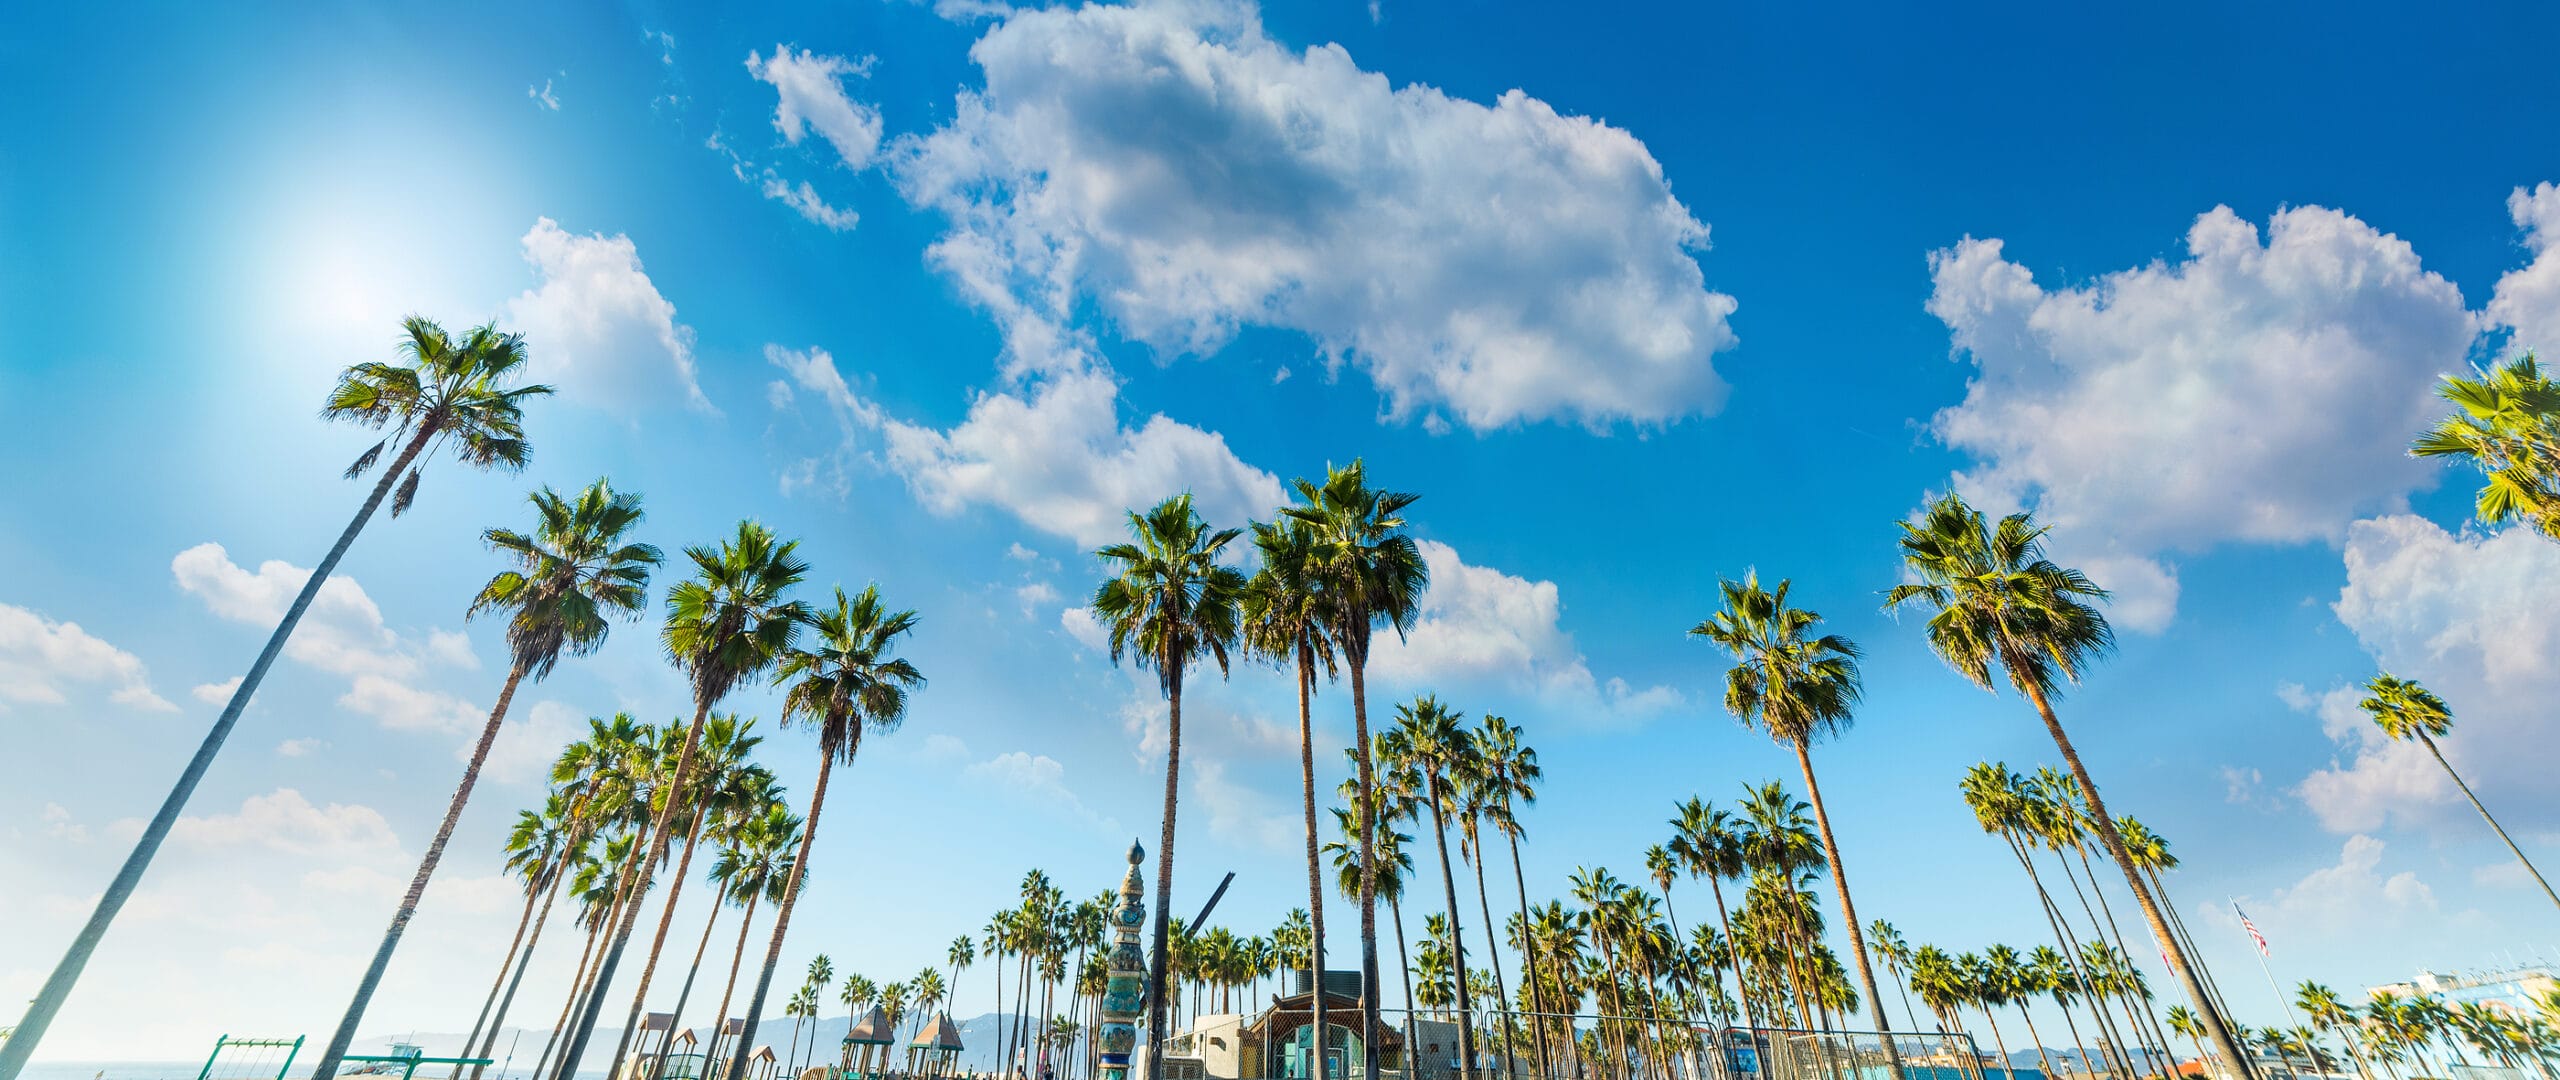 A photography session capturing palm trees on a Santa Barbara beach with a blue sky backdrop.